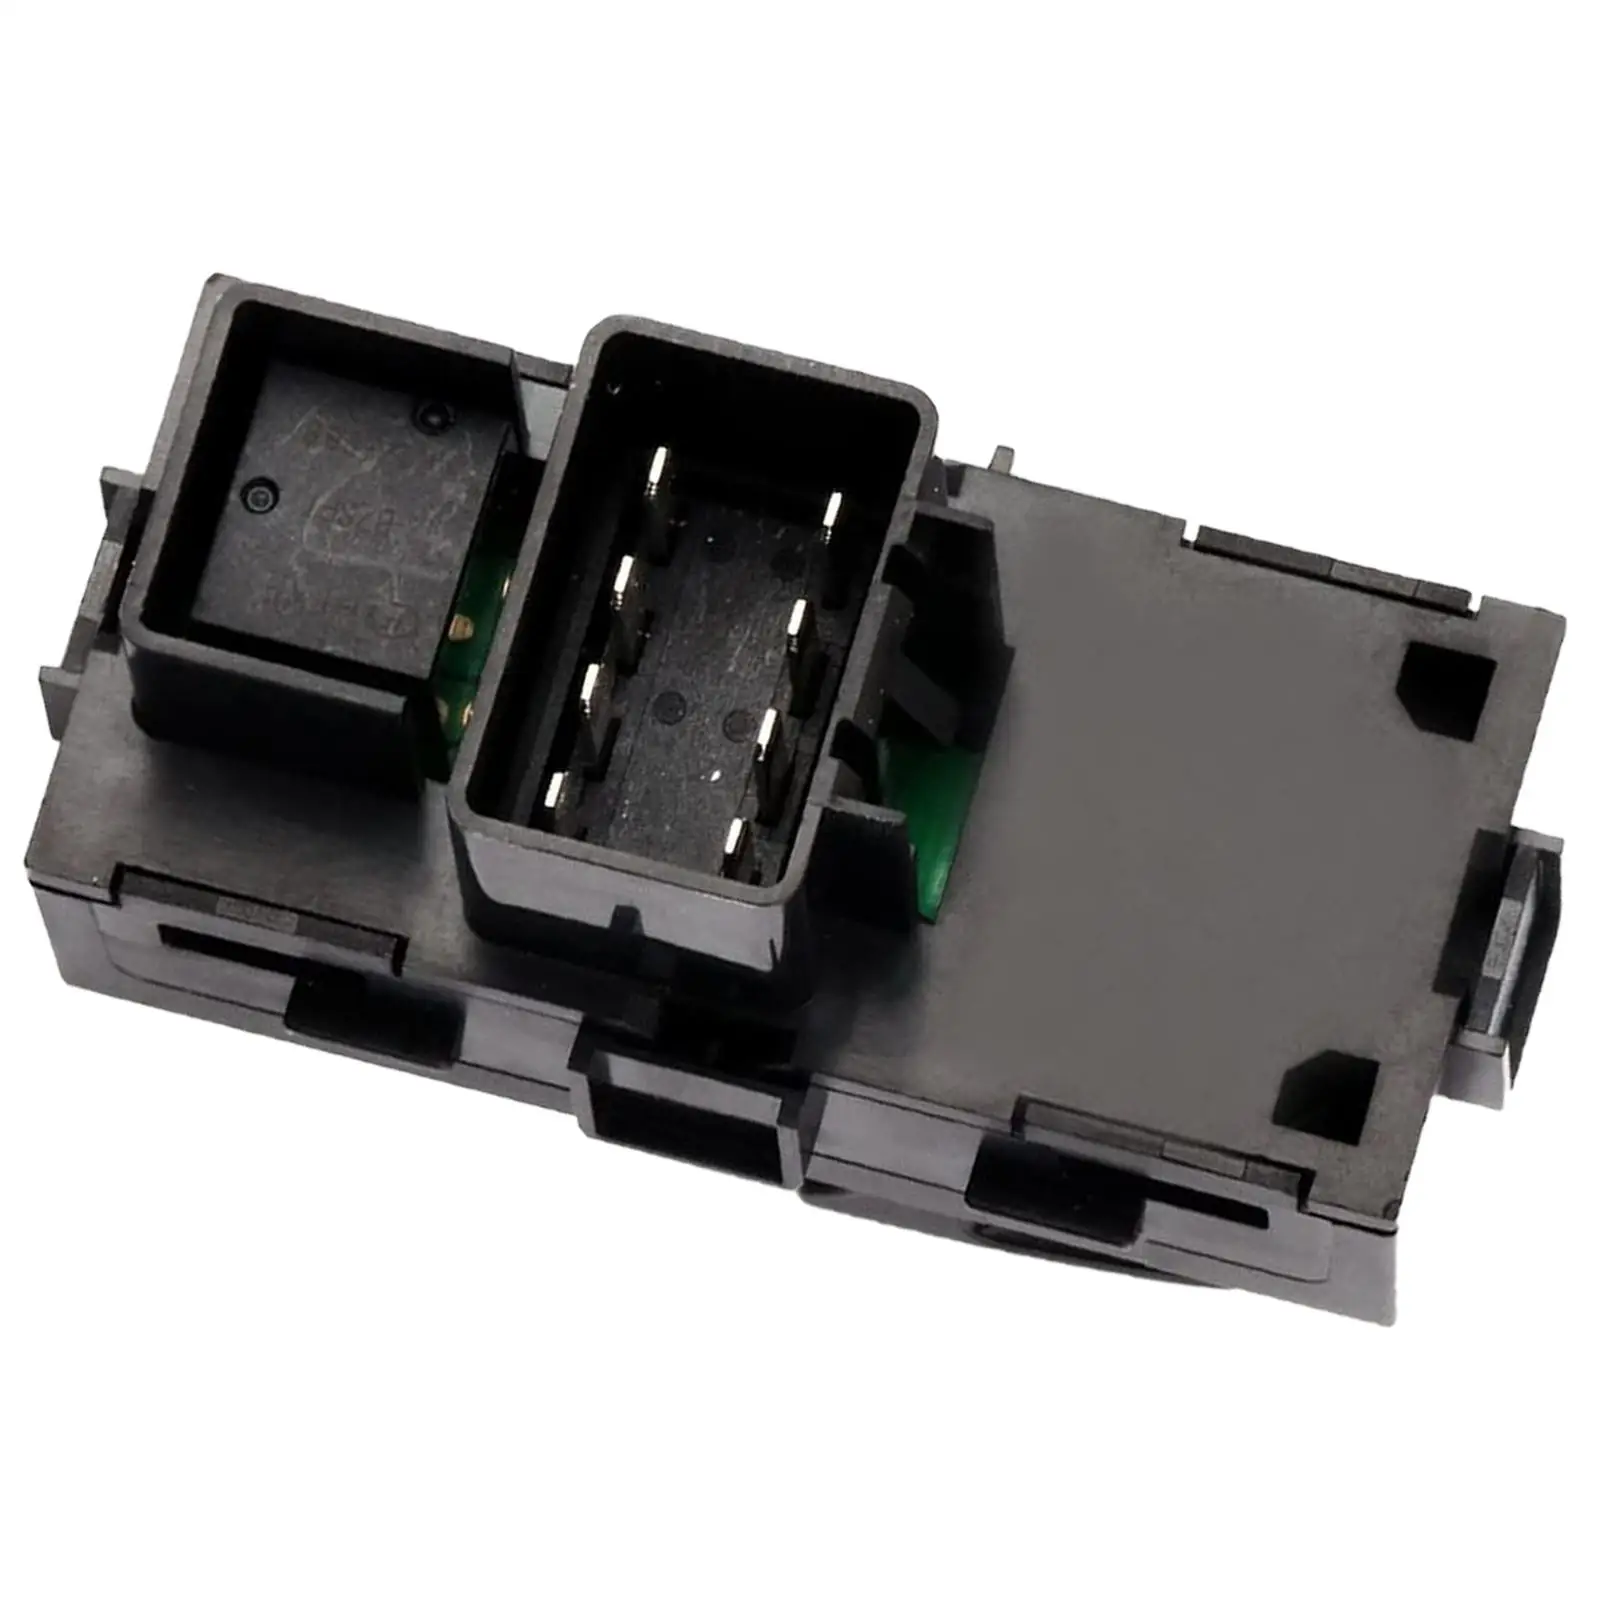 Power Window Switch ,for  12-2013, Rear Driver Passenger Side, Fit for  Rh LH ,Automotive Parts  Interior Switches